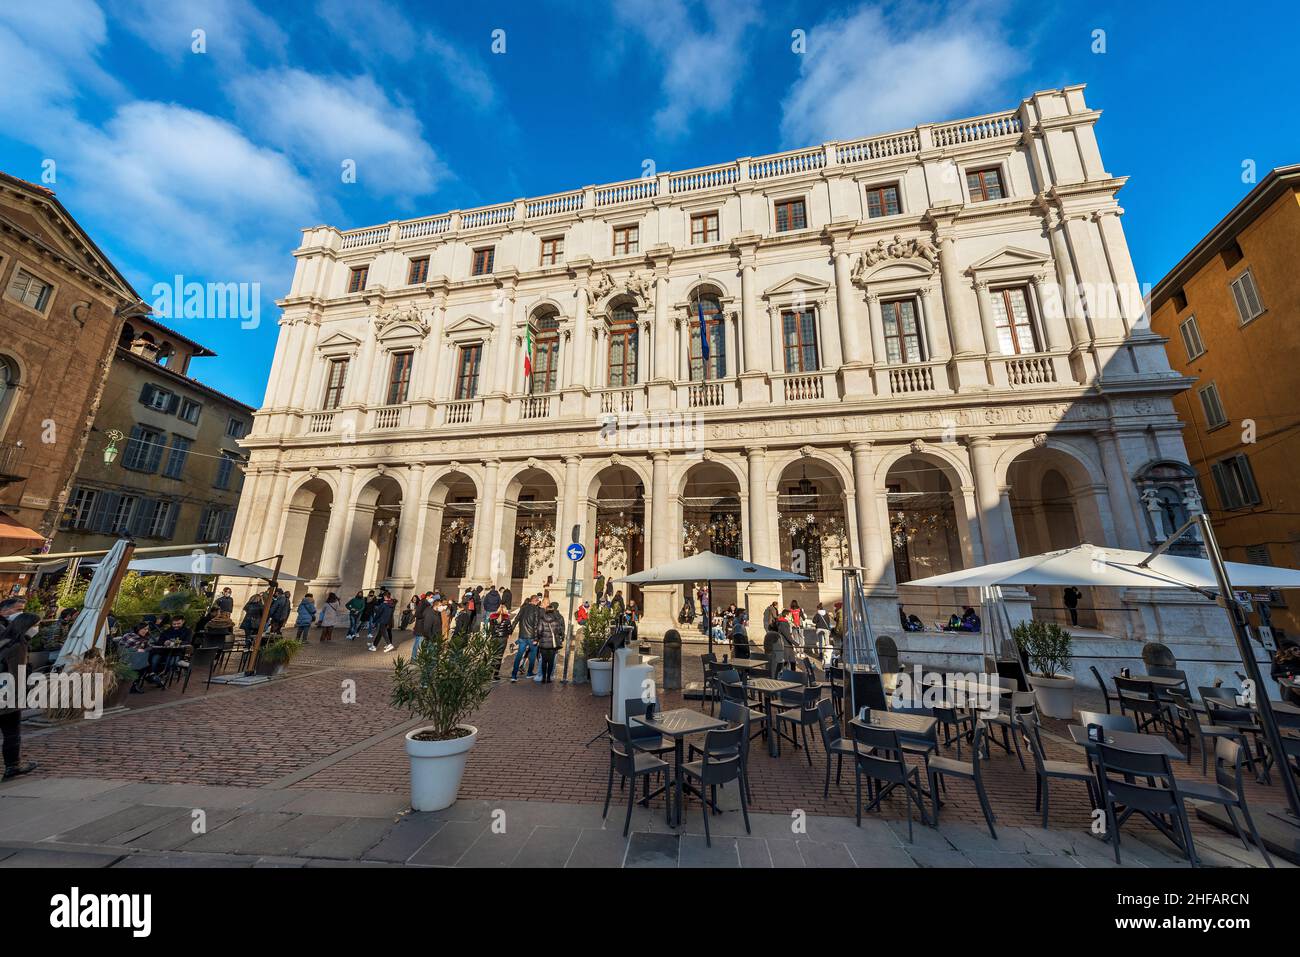 Palazzo Nuovo (New Palace) in Renaissance style, 1600-1958, inside is the Civic Library Angelo Mai, Bergamo upper town, Lombardy, Italy, Europe. Stock Photo